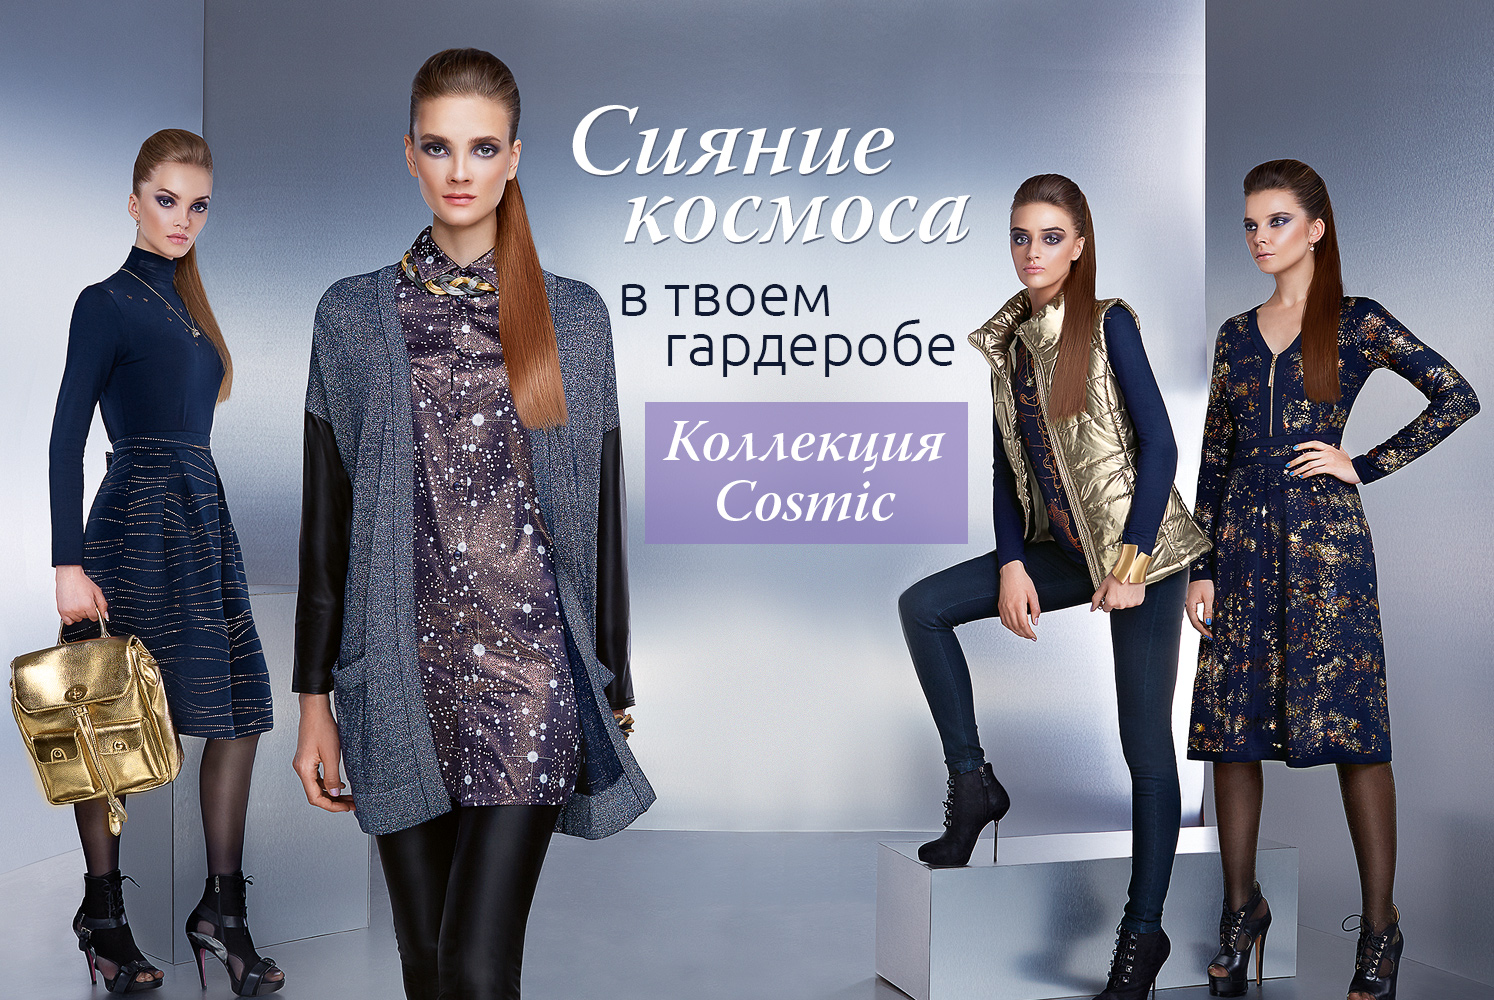 Now collection. Женская коллекция одежды. Новая коллекция женской одежды. Новая коллекция одежды Фаберлик. Одежда каталога Фаберлик женская.